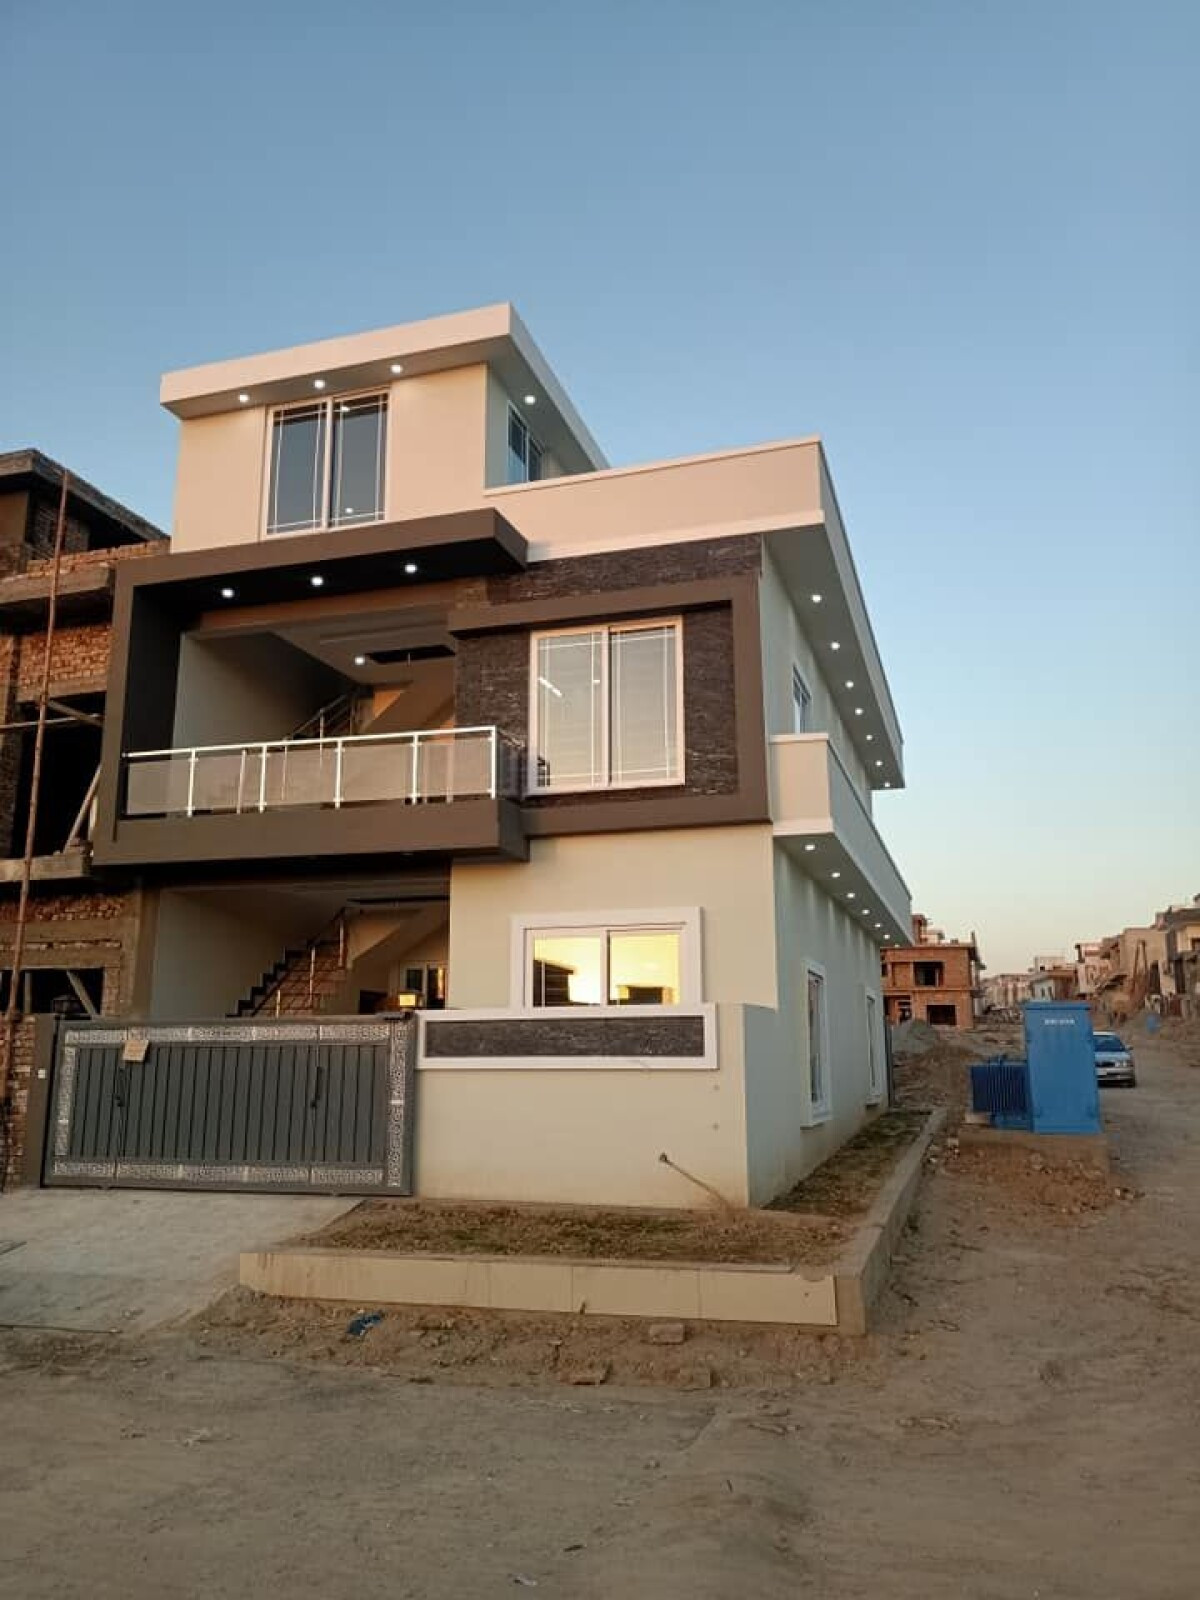 8 Marla House For Sale In Faisal Town - F-18